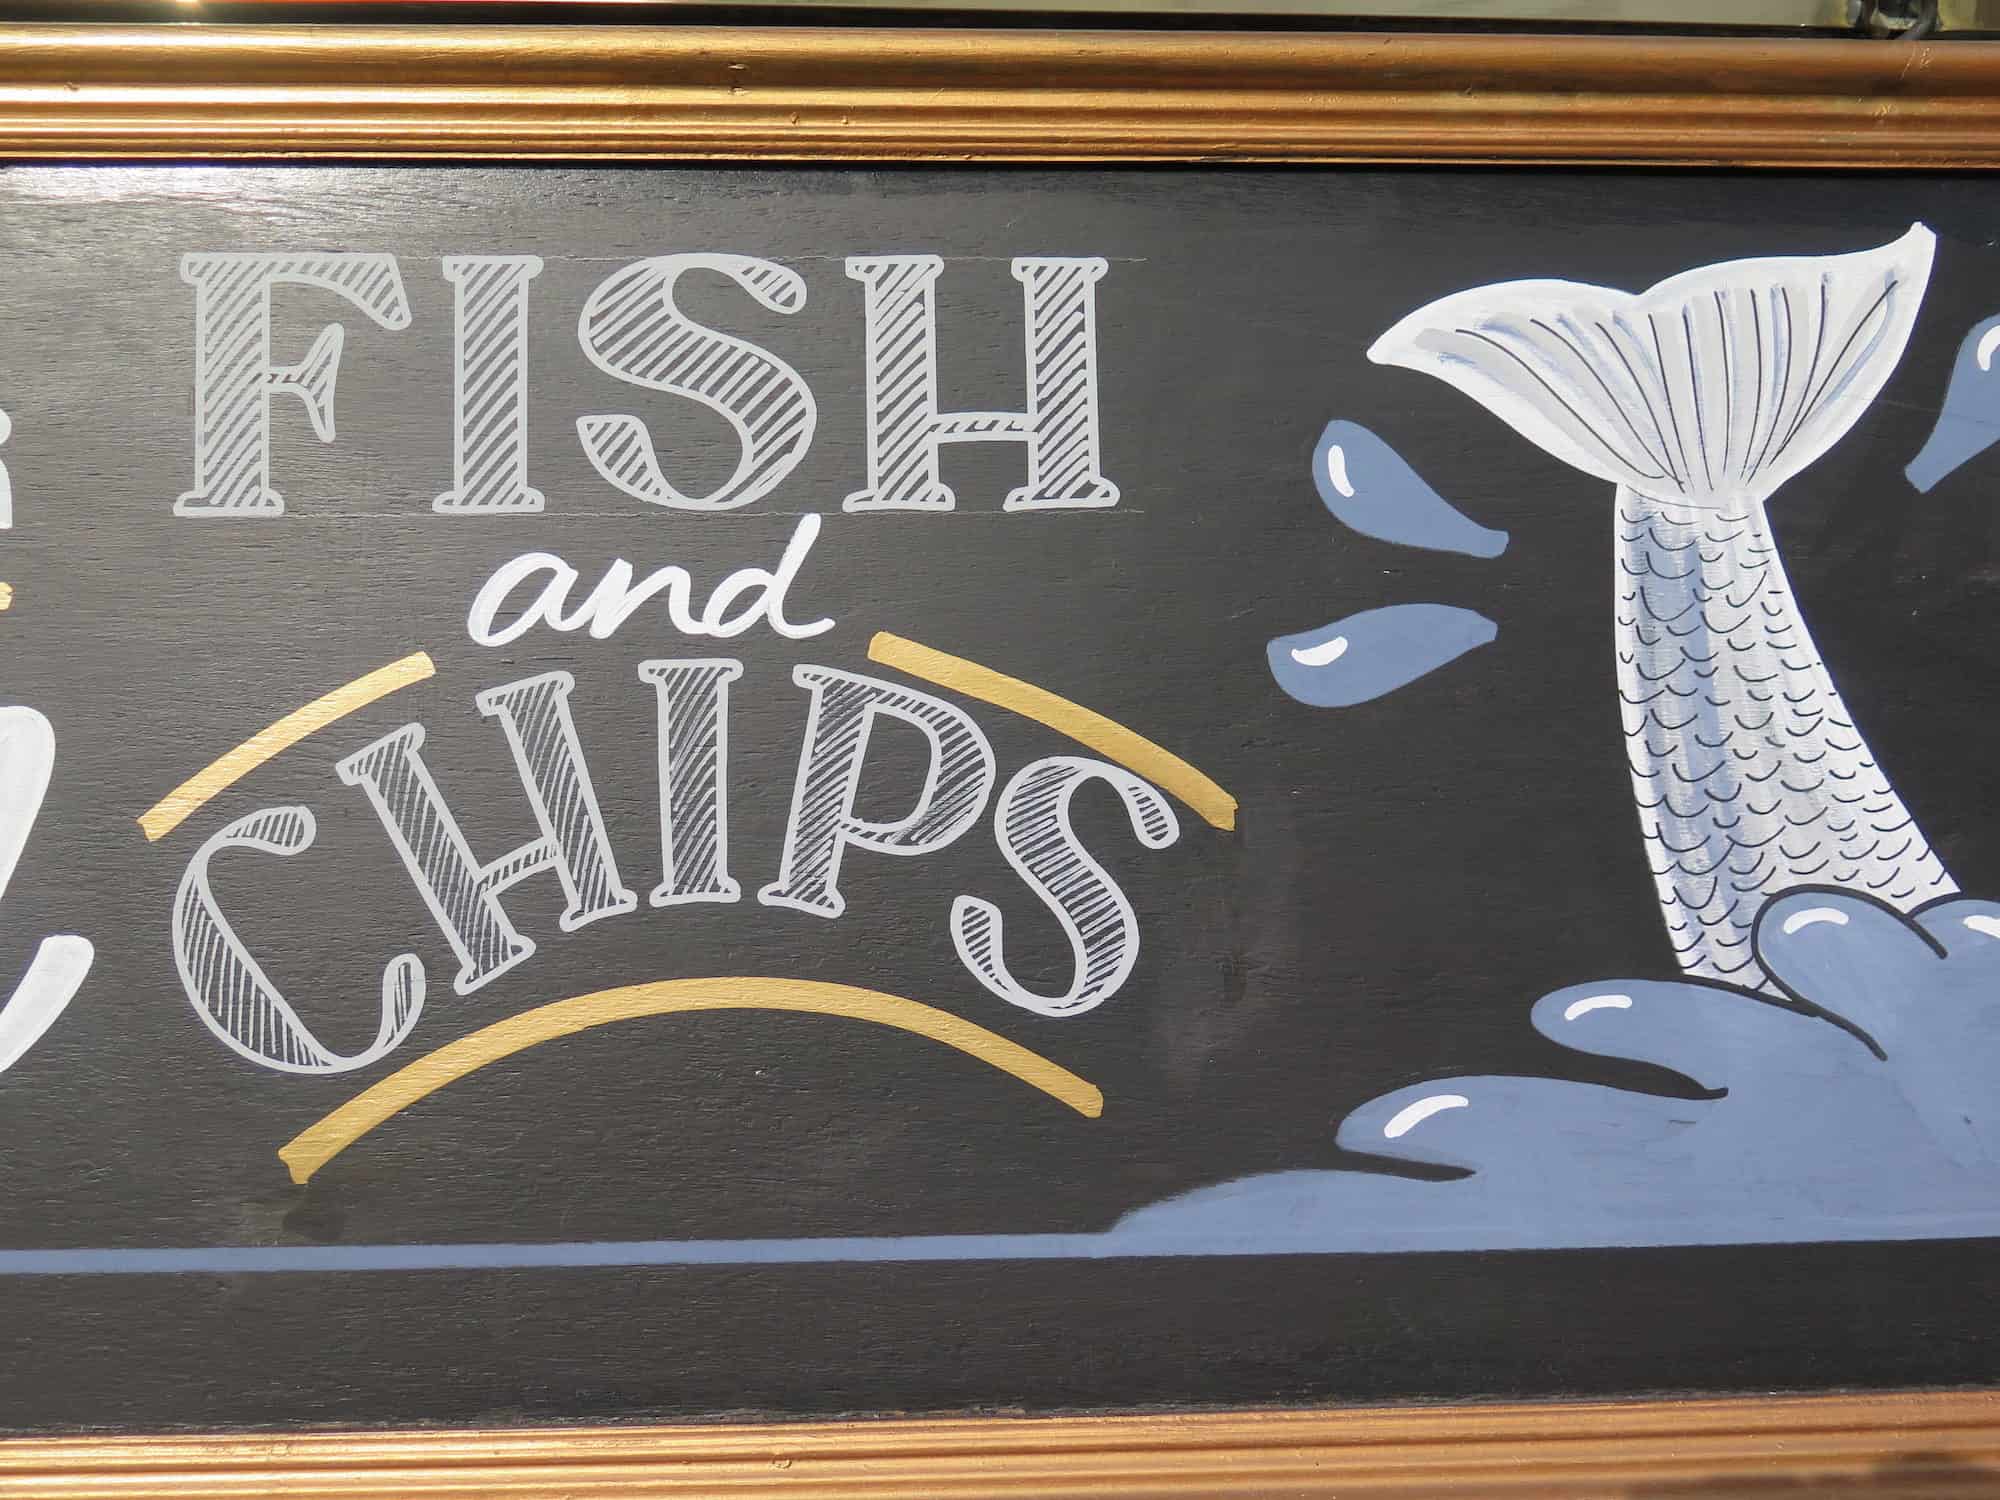 When in London, one must try fish and chips, one of the national dishes of England.